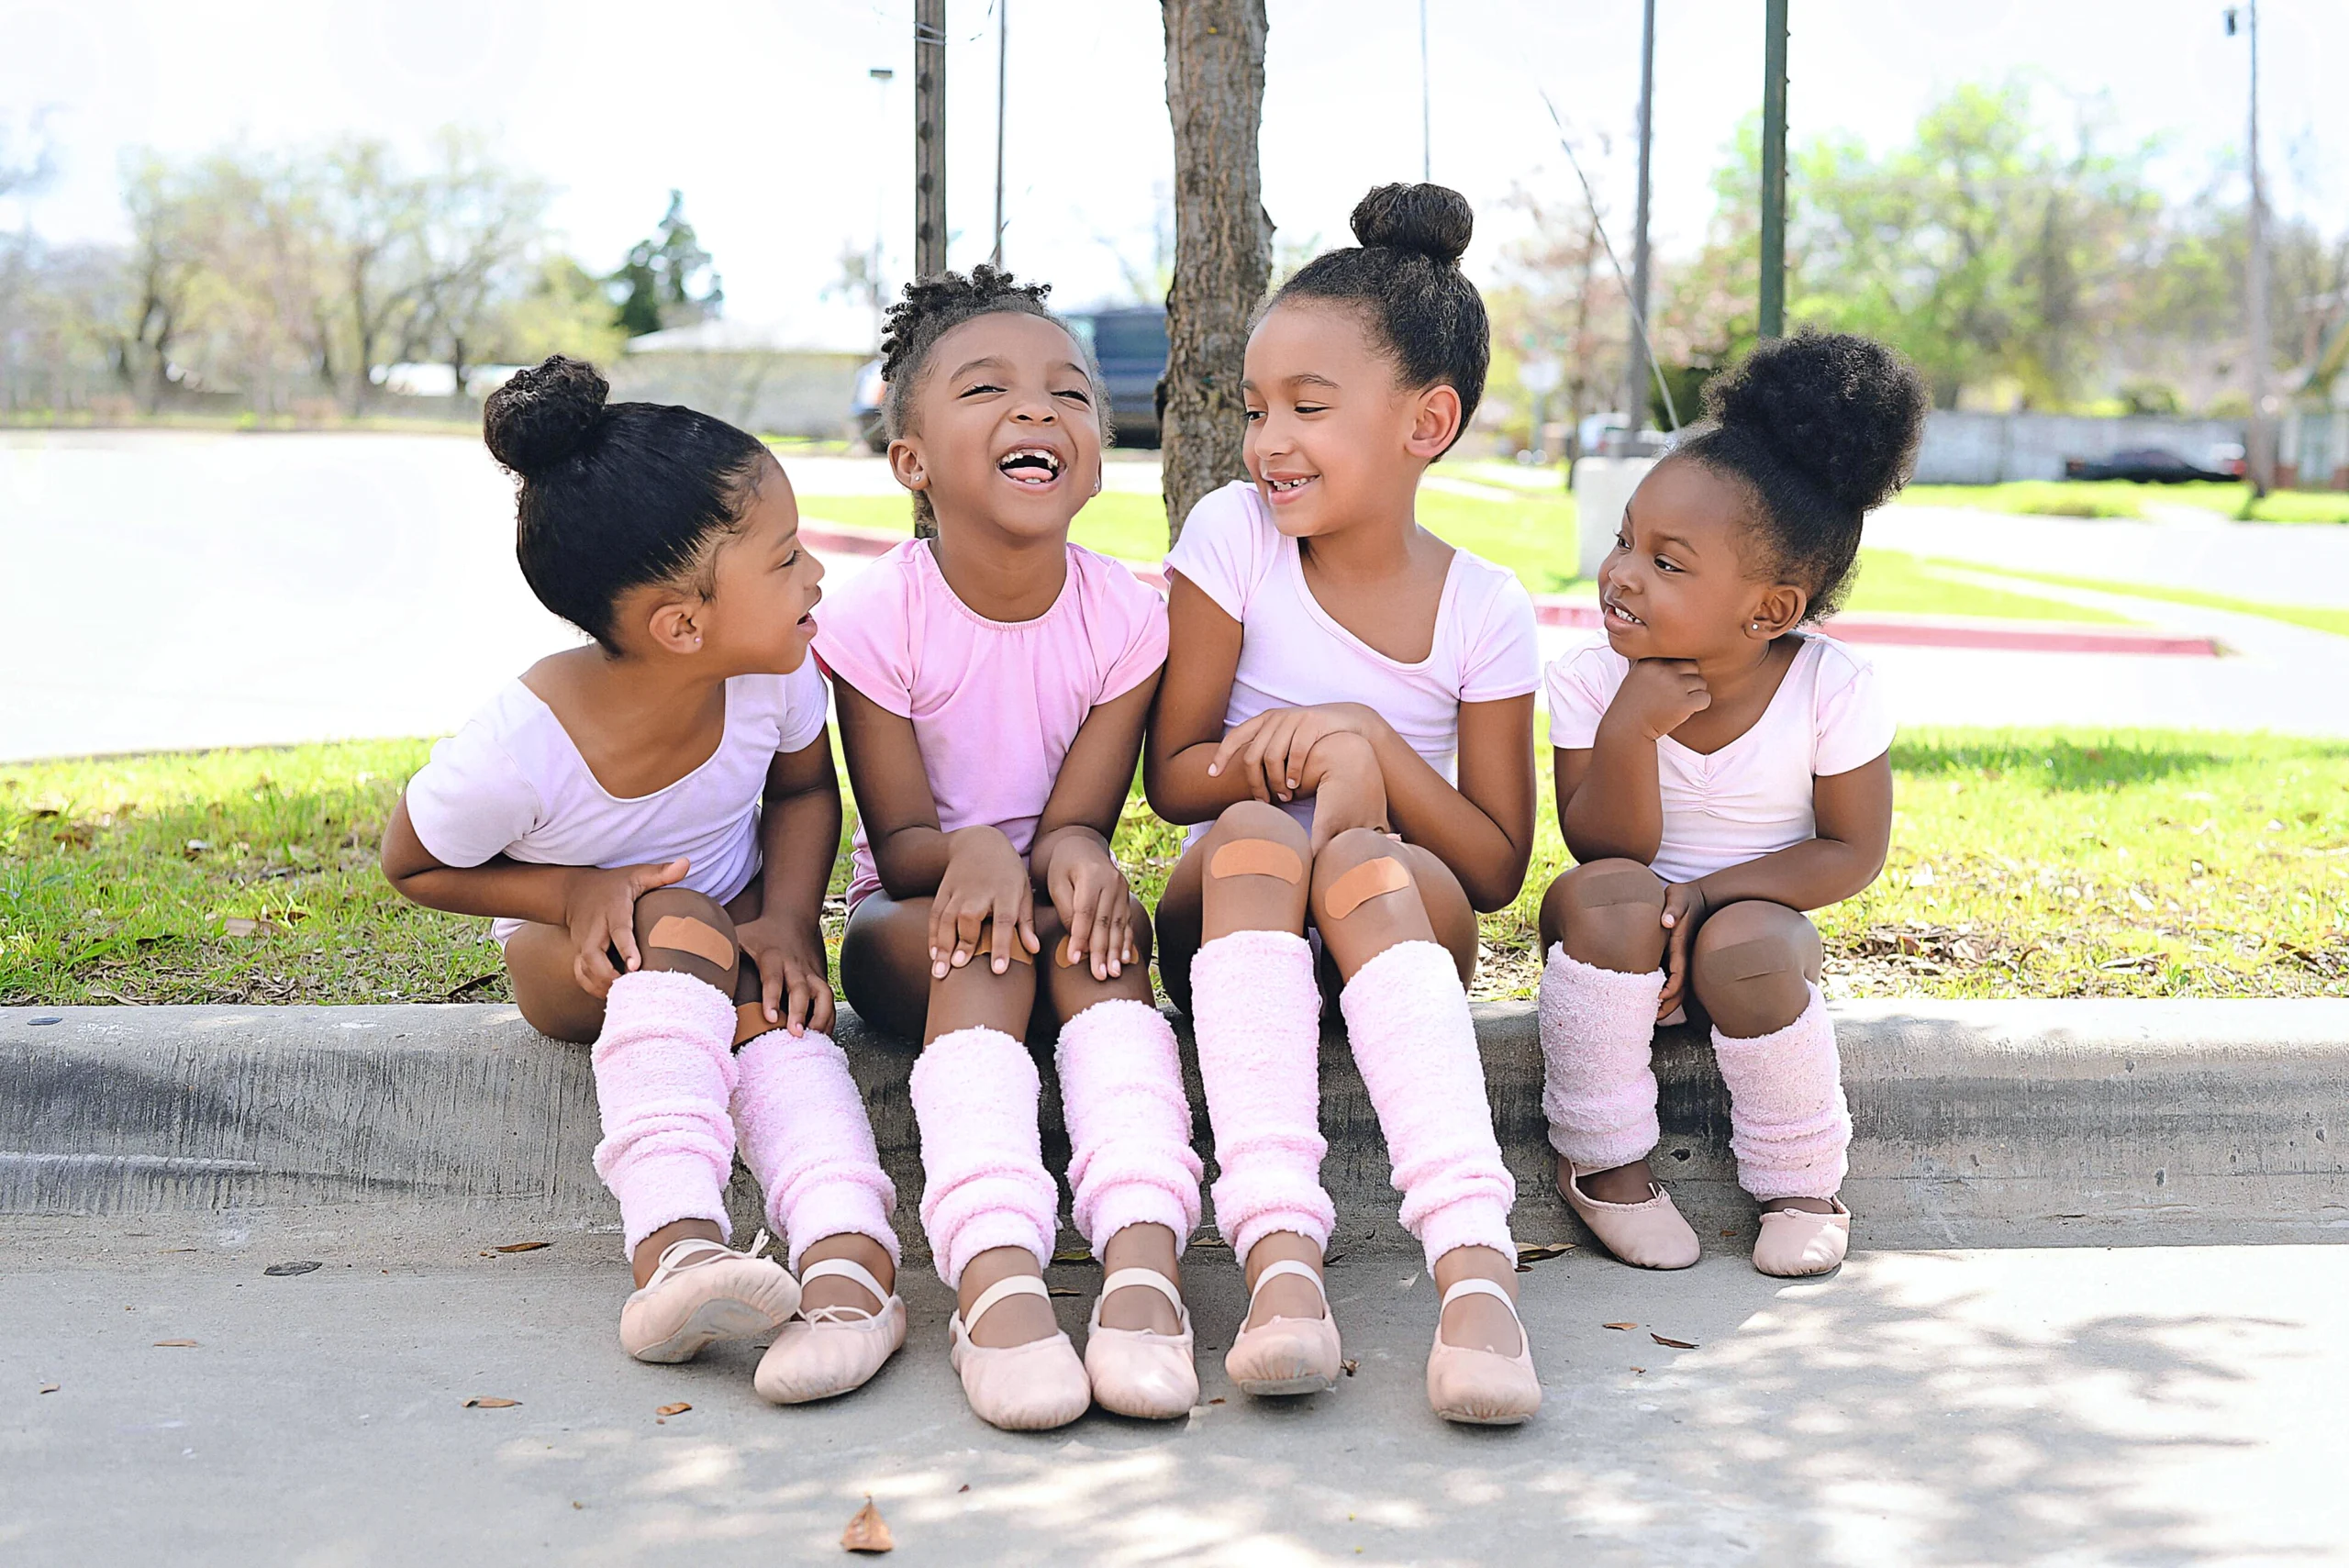 Outside on a sunny day, four young Black ballerinas (approximately age 5) sit together on a curb and laugh. They all wear light pink cap-sleeve leotards and pink leg warmers.